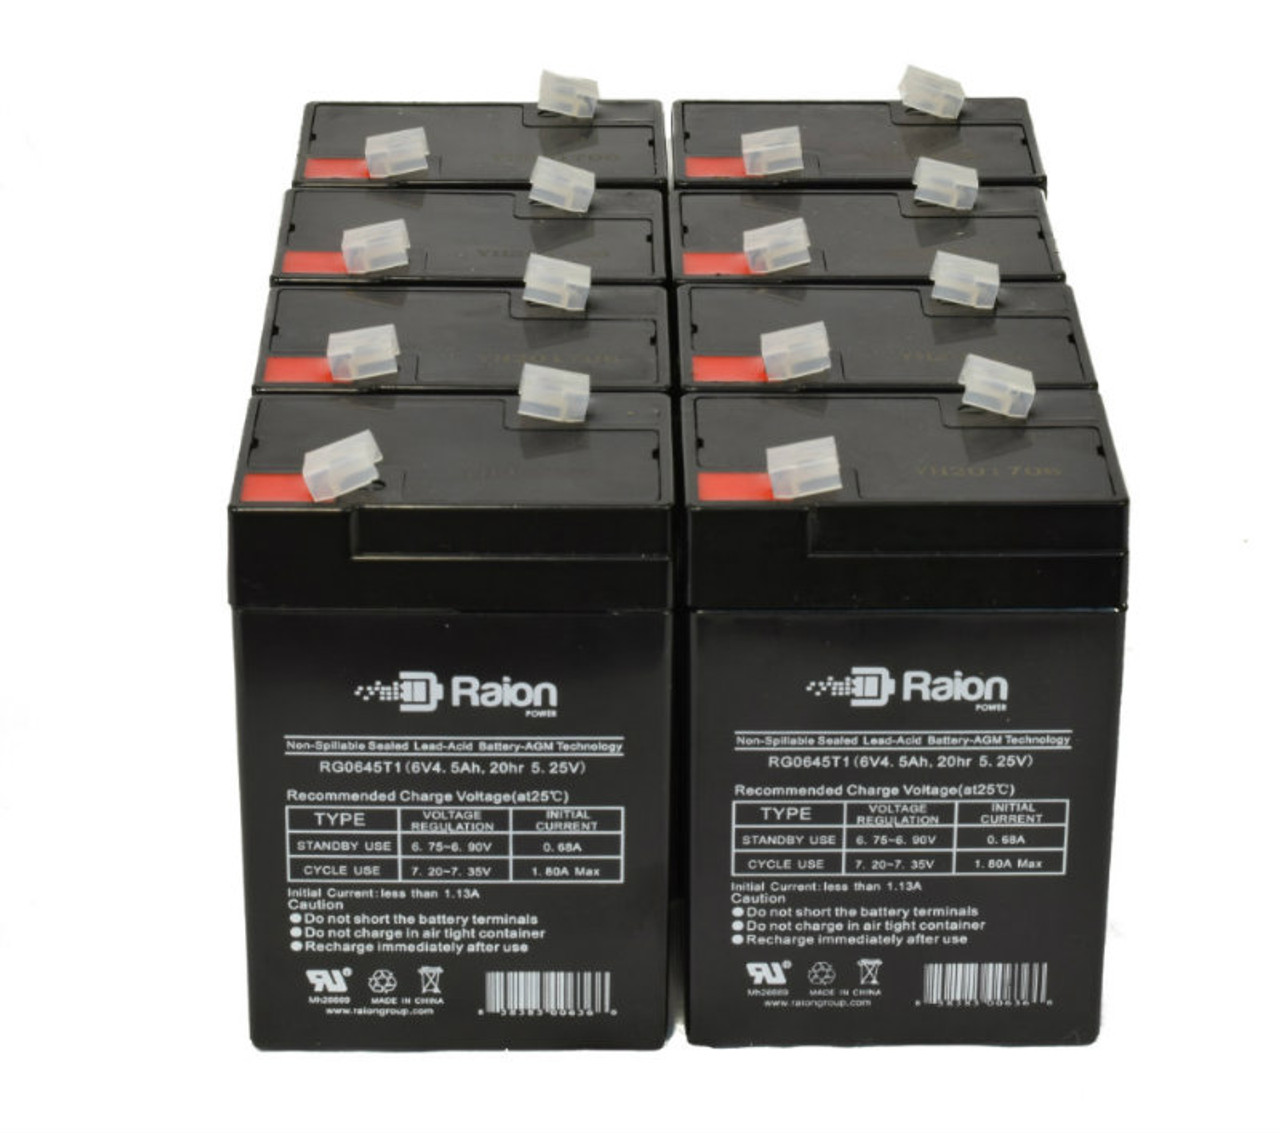 Raion Power 6 Volt 4.5Ah RG0645T1 Replacement Battery for Power Kingdom PS5L-6 - 8 Pack